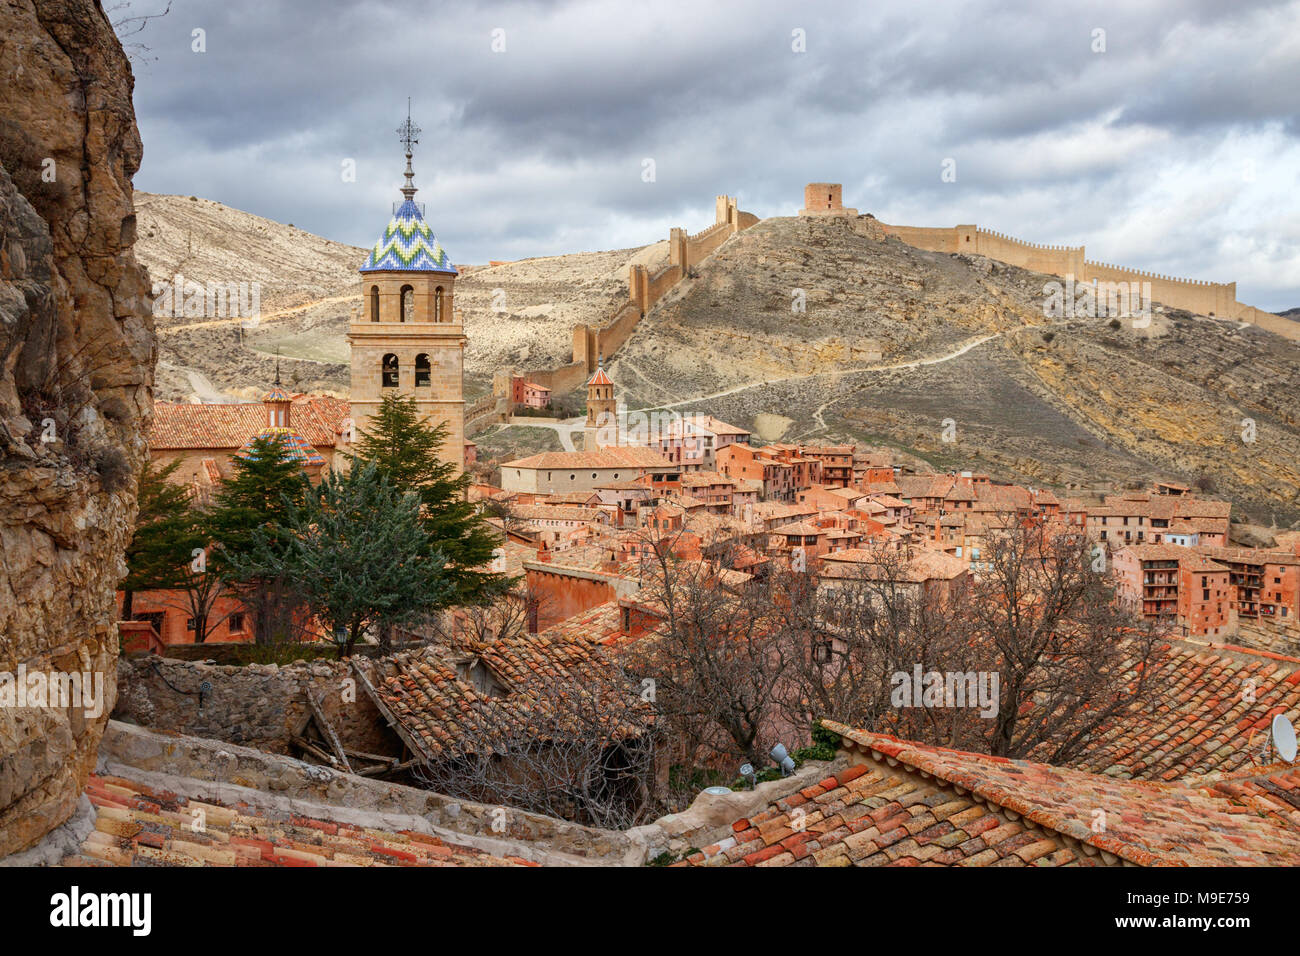 Beautiful view of the medieval town Albarracin with hills and city walls at the background under a cloudy sky. Teruel, Spain. Stock Photo